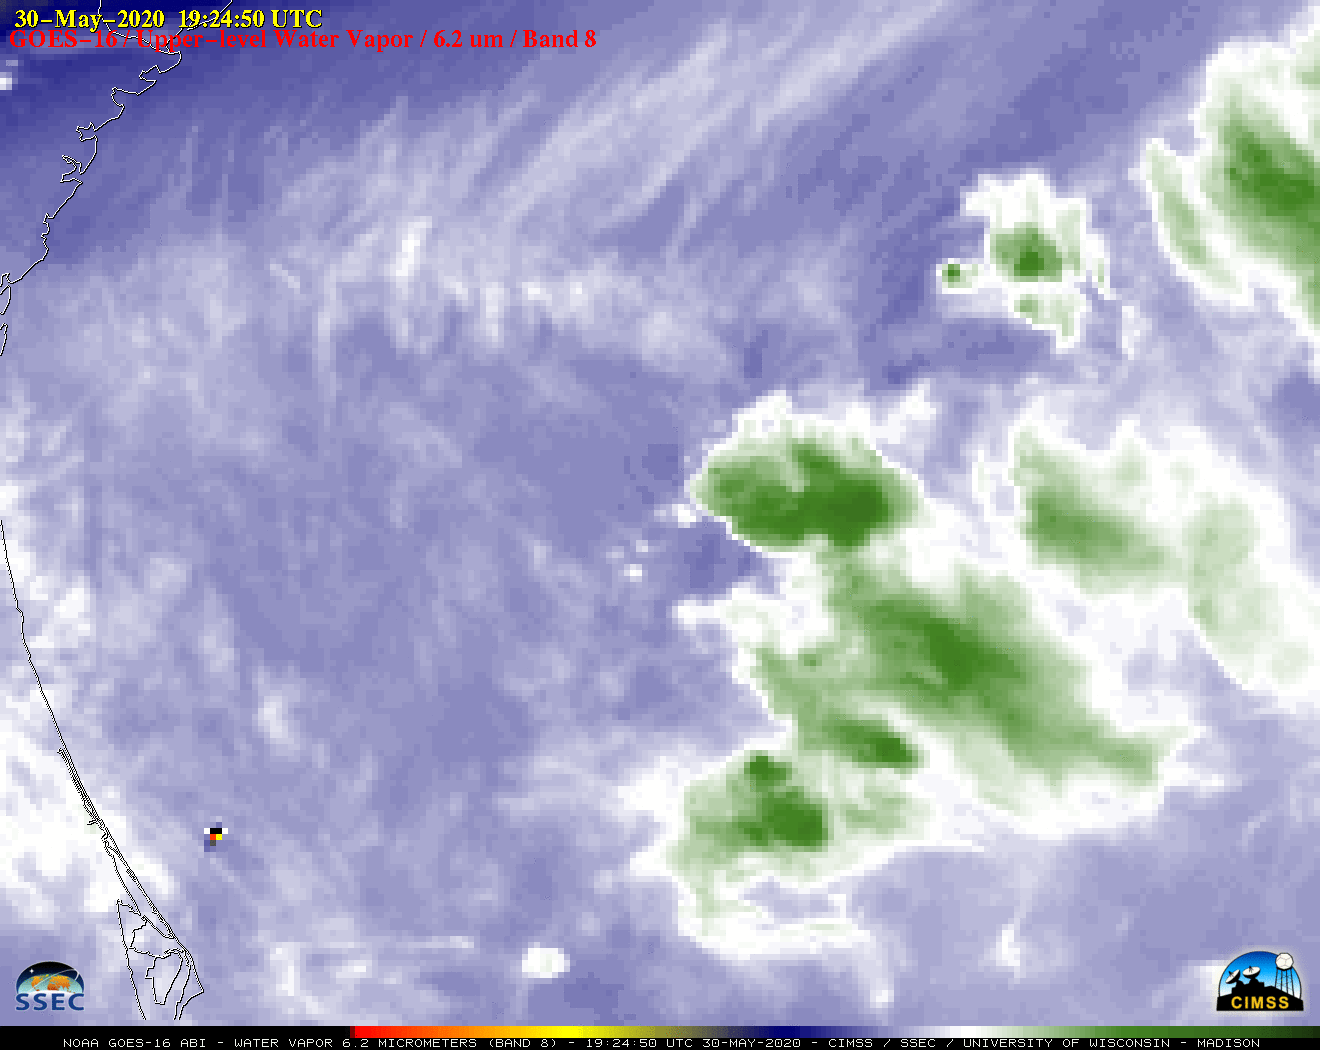 GOES-16 Upper-level (6.2 µm) Water Vapor images [click to play animation | MP4]